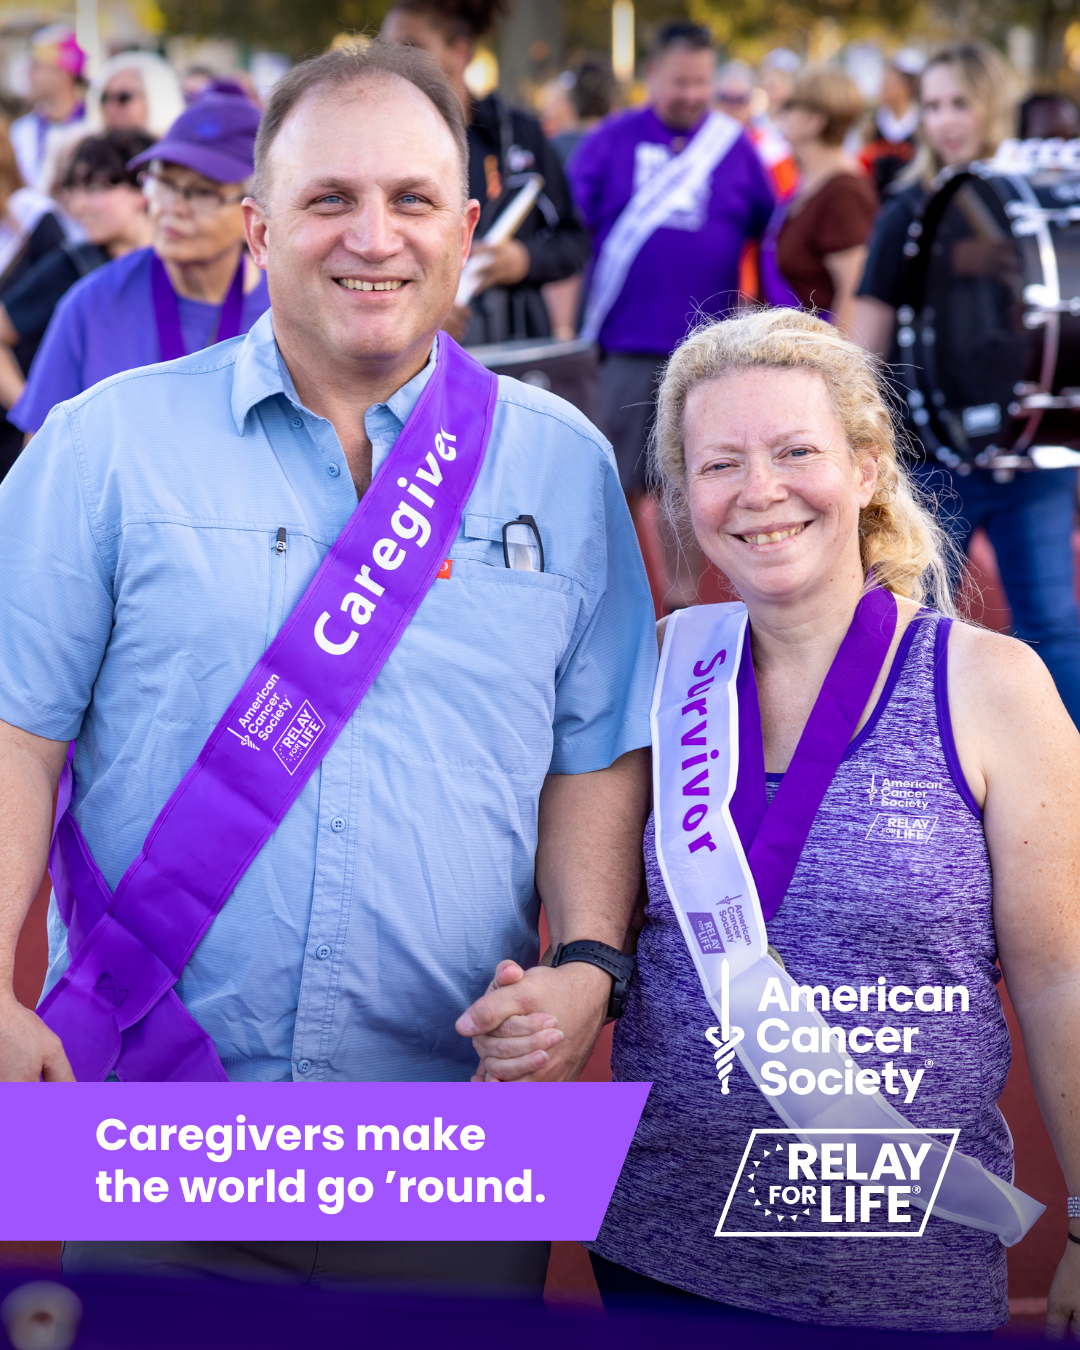 Help us celebrate the caregivers who offer

their support every single day. Sign up at
RelayForLife.org/EVENTNAME to help end cancer as

we know it, for everyone. #RelayForLifeEVENTNAME